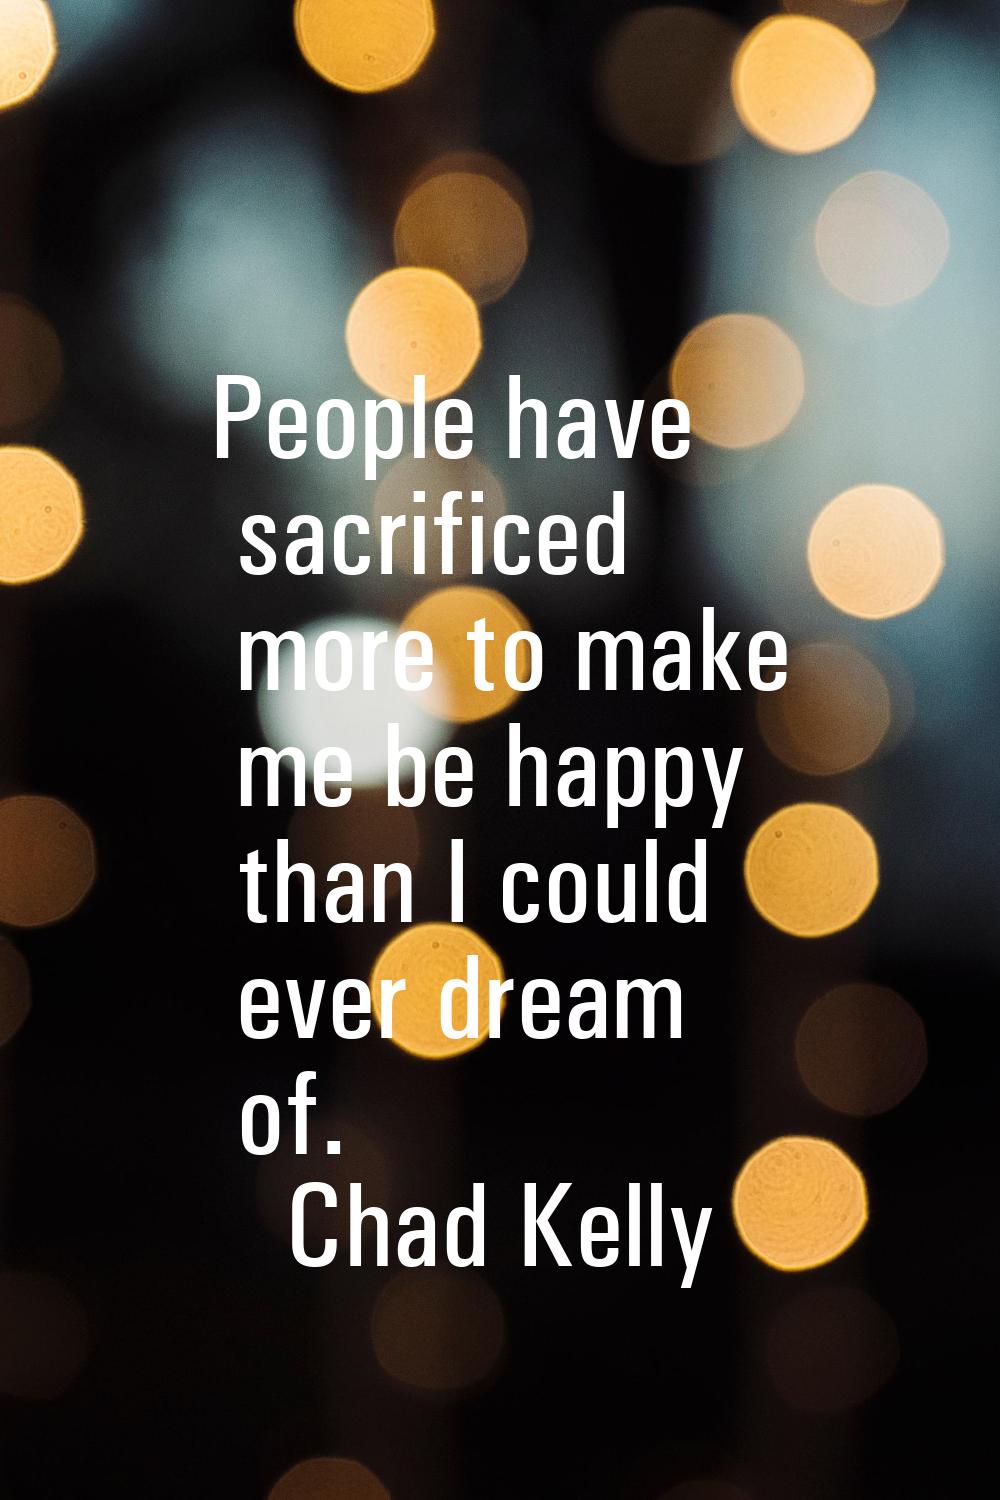 People have sacrificed more to make me be happy than I could ever dream of.